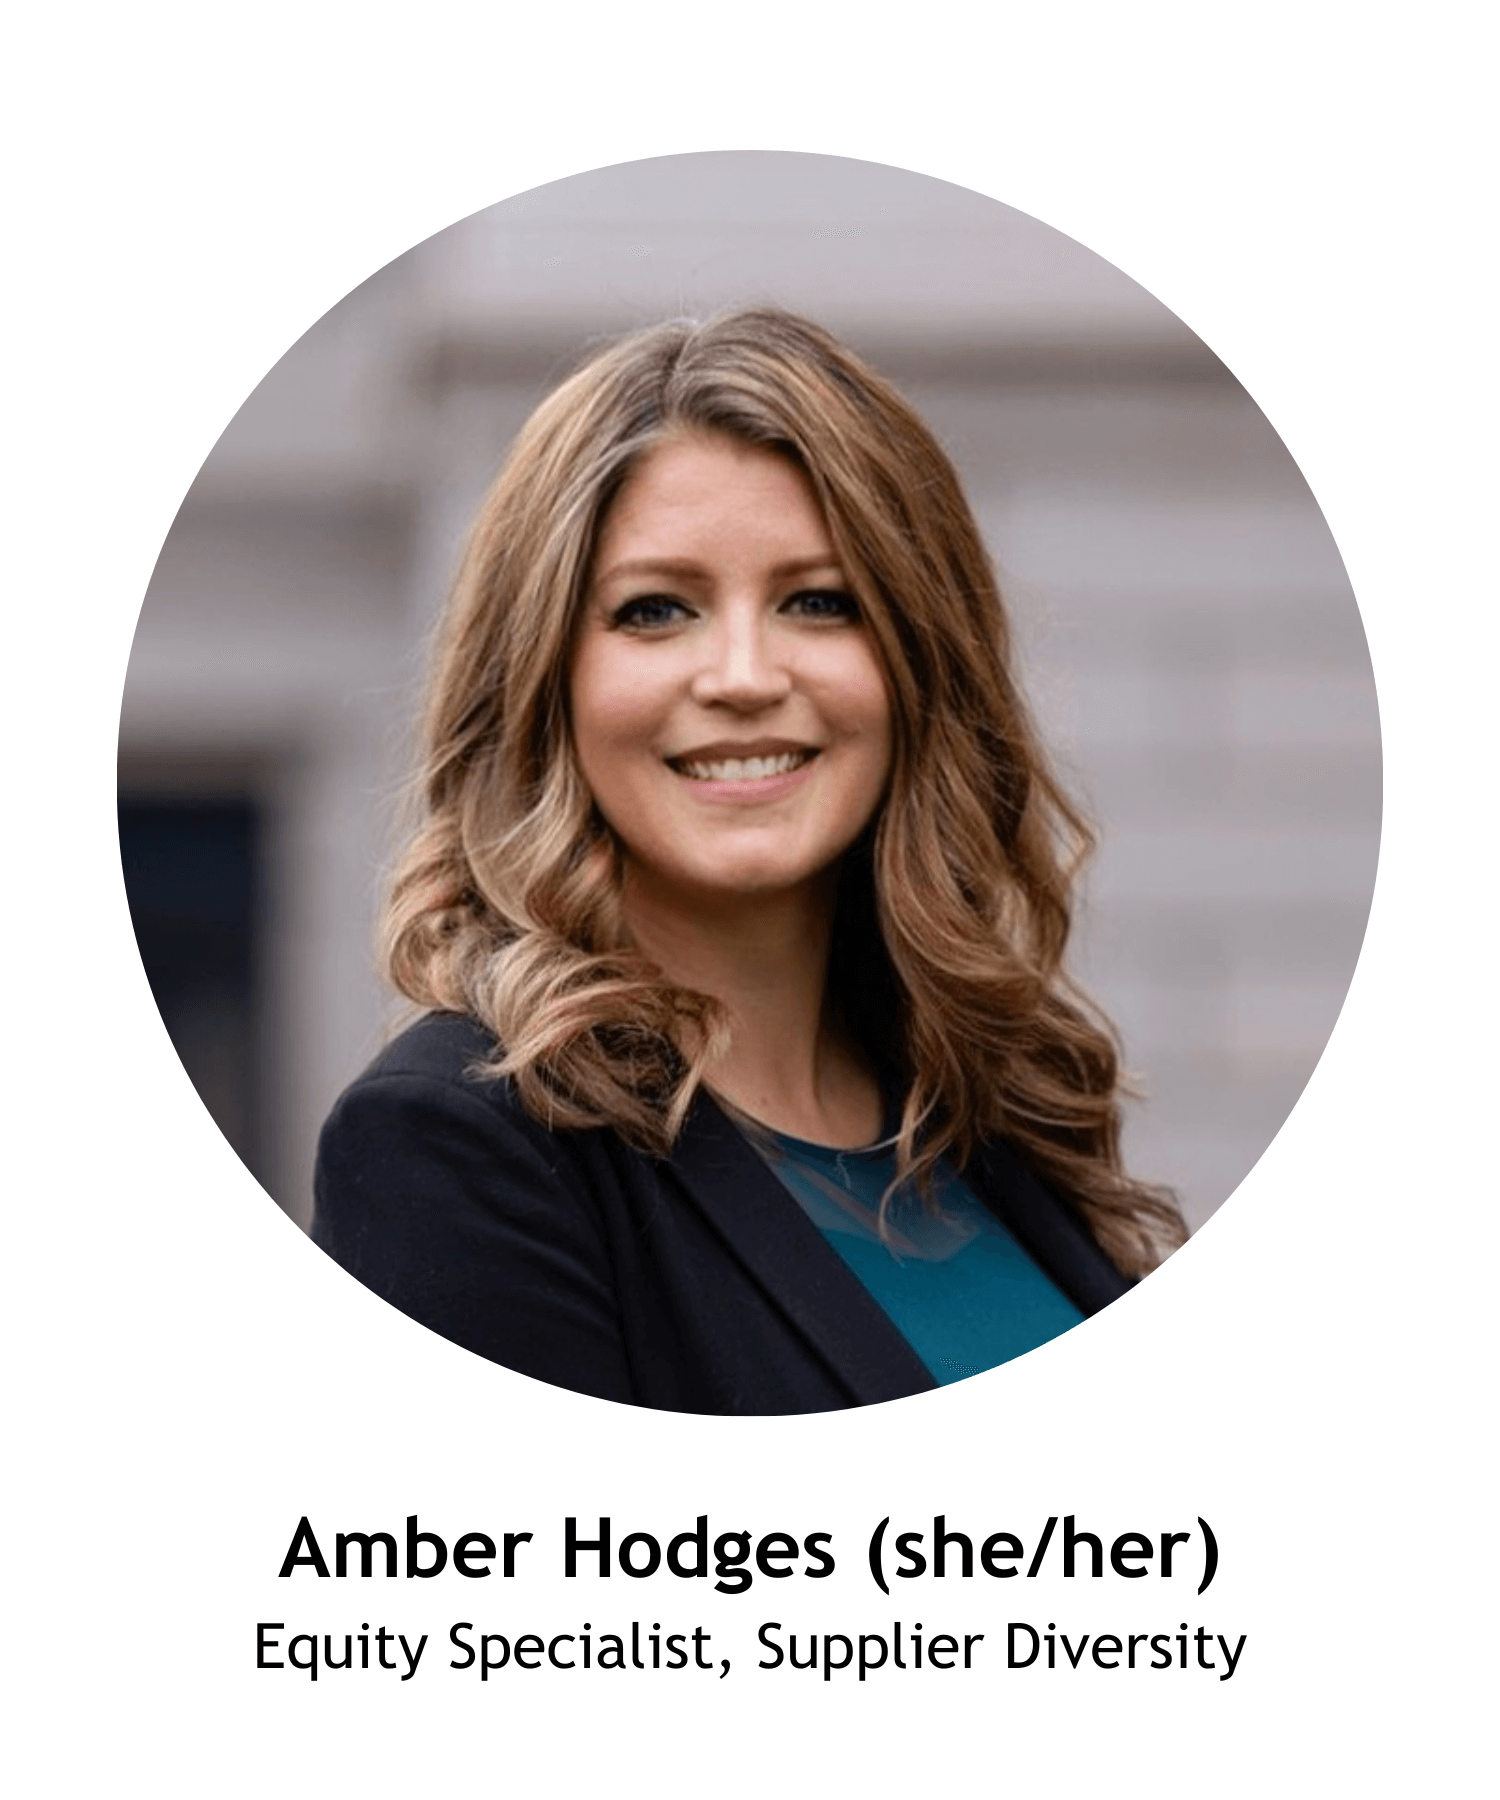 Amber Hodges (she/her), Equity Specialist, Supplier Diversity